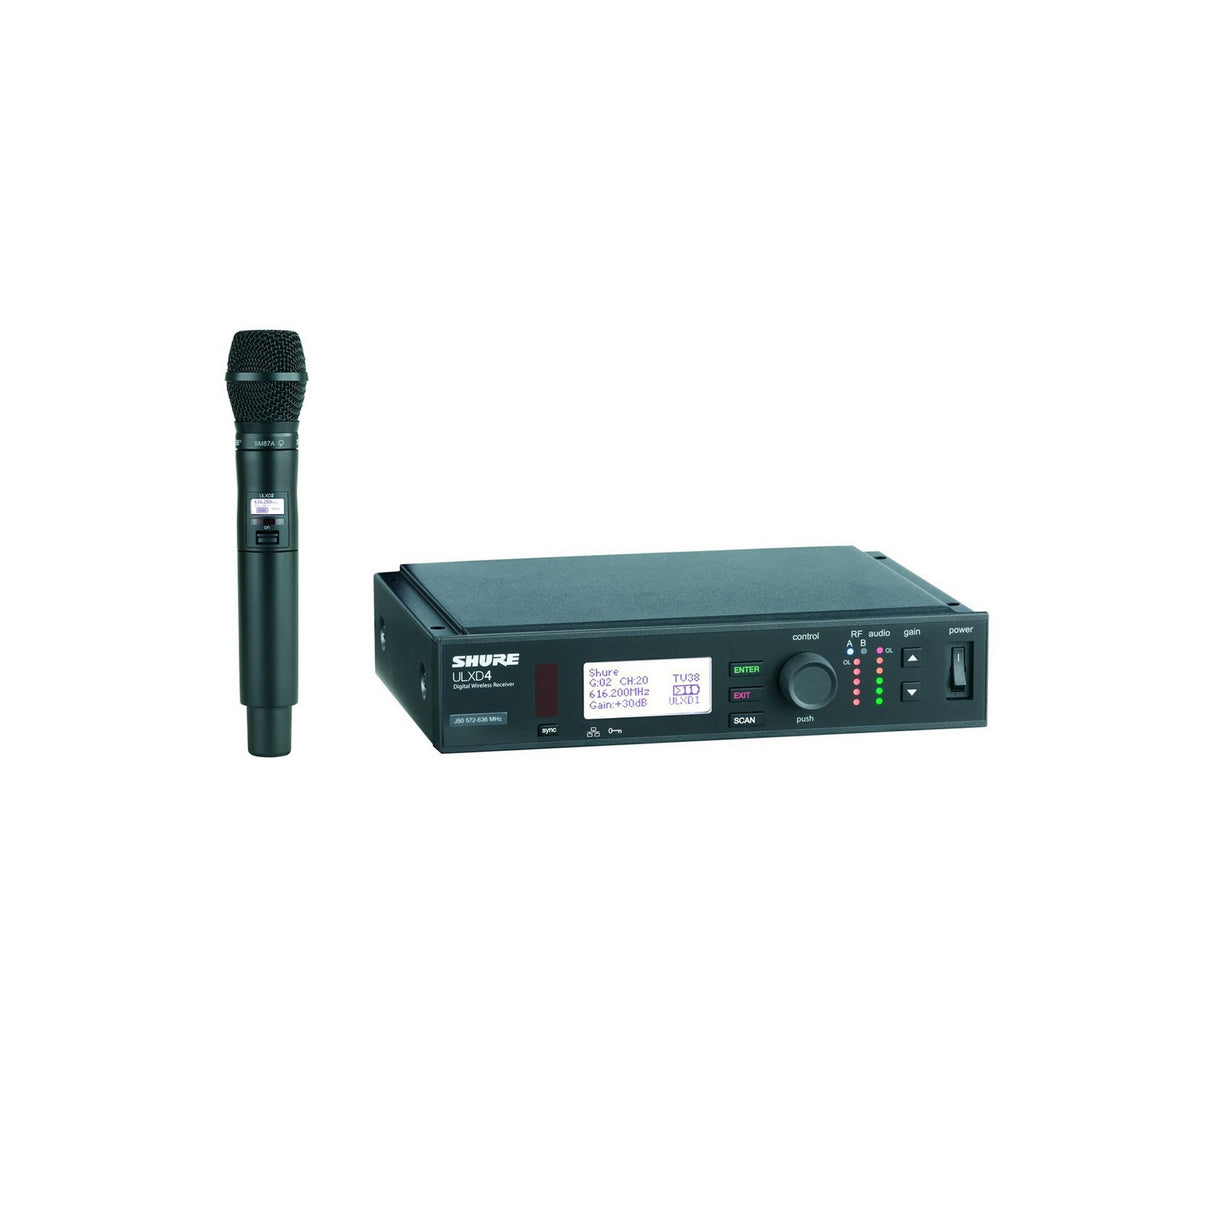 Shure ULXD24/SM87 Handheld Wireless Microphone System, H50 534-598 MHz